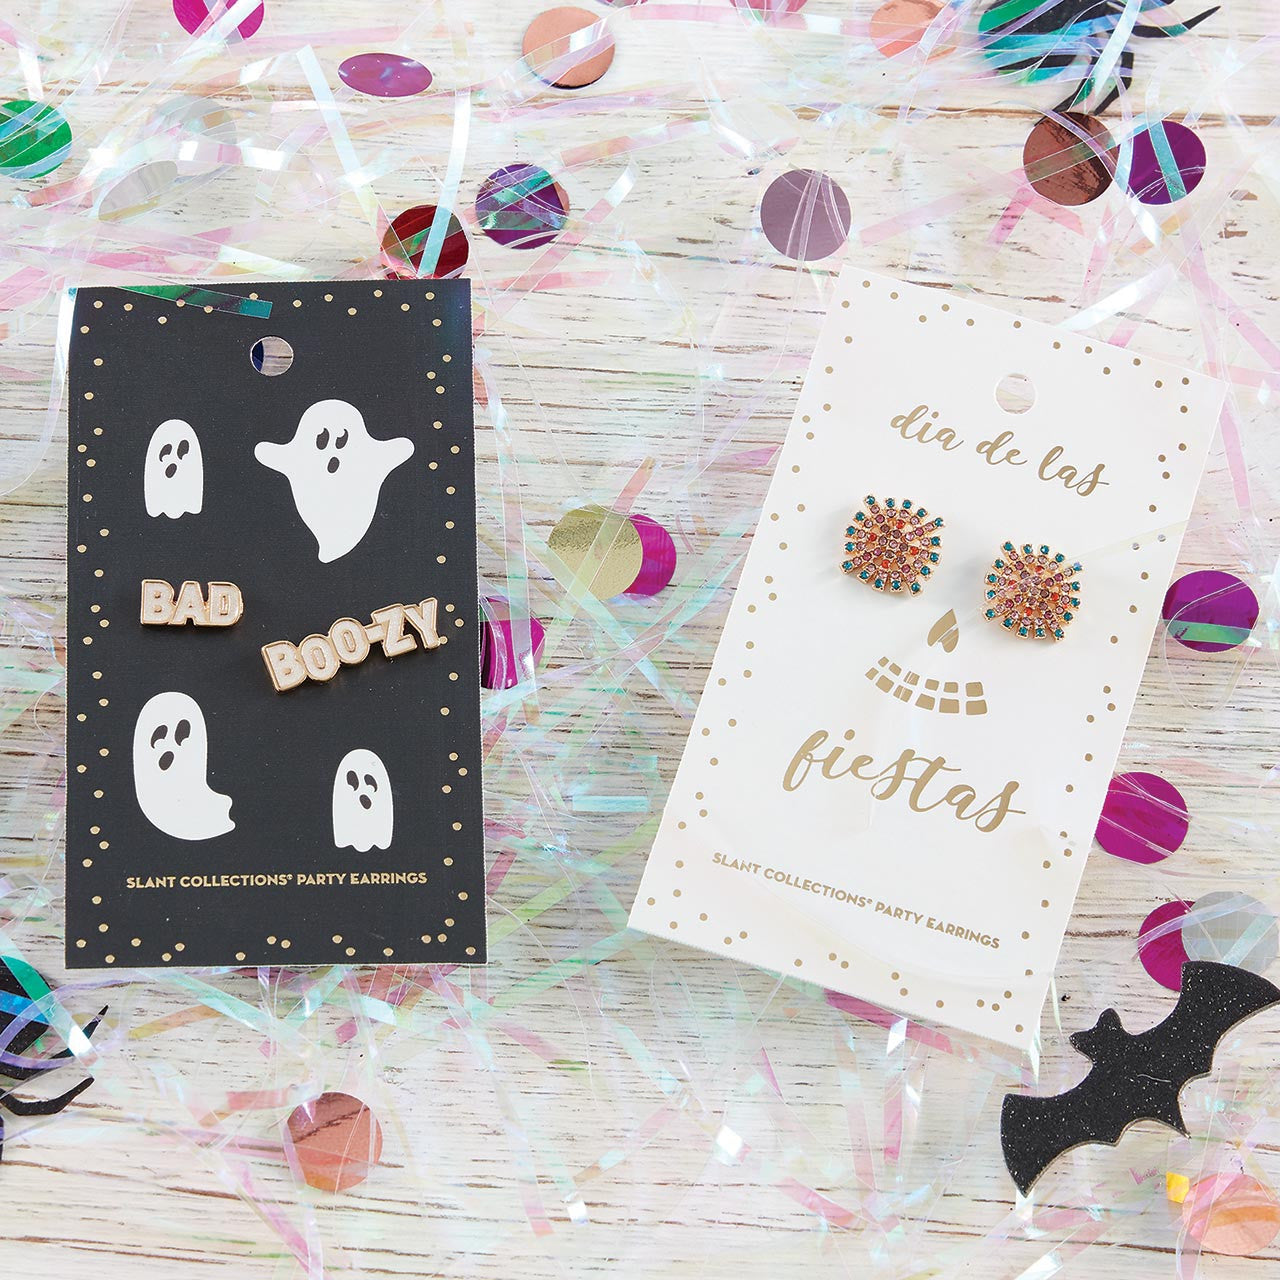 Bad and Boozy Party Earrings | Mismatched Earrings on Halloween Themed Card